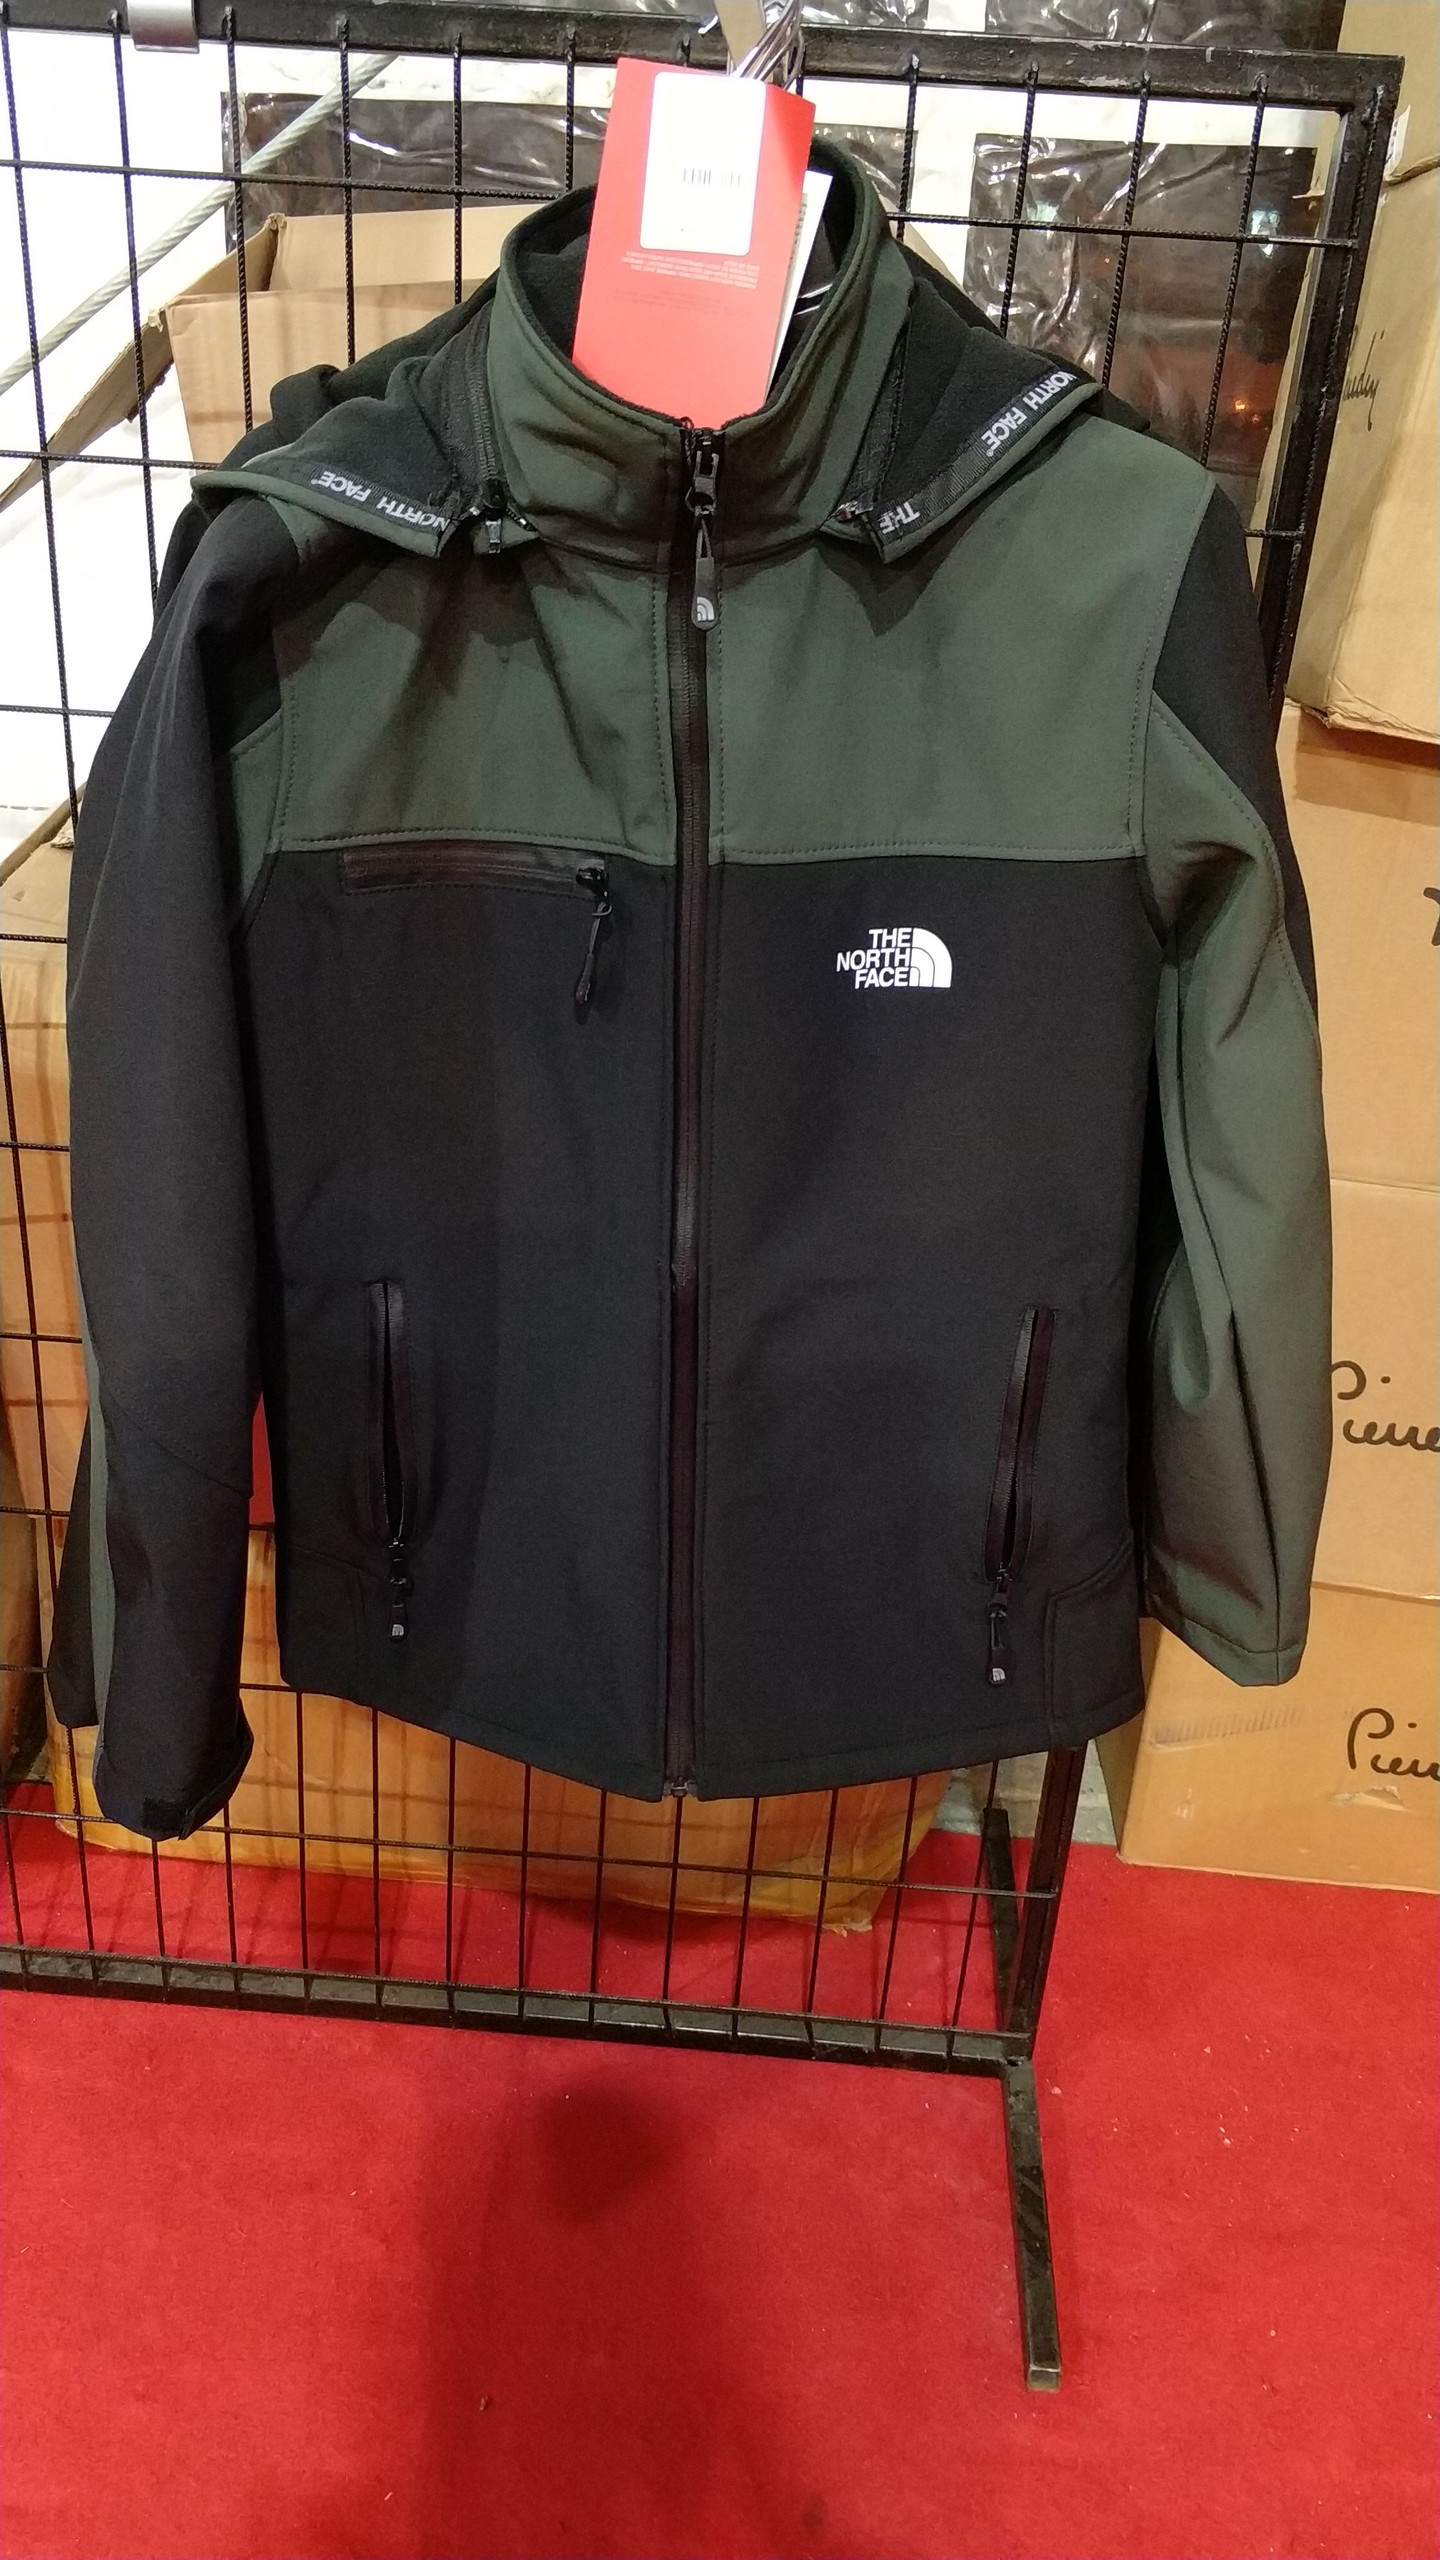 The North Face Mont 170 tl.